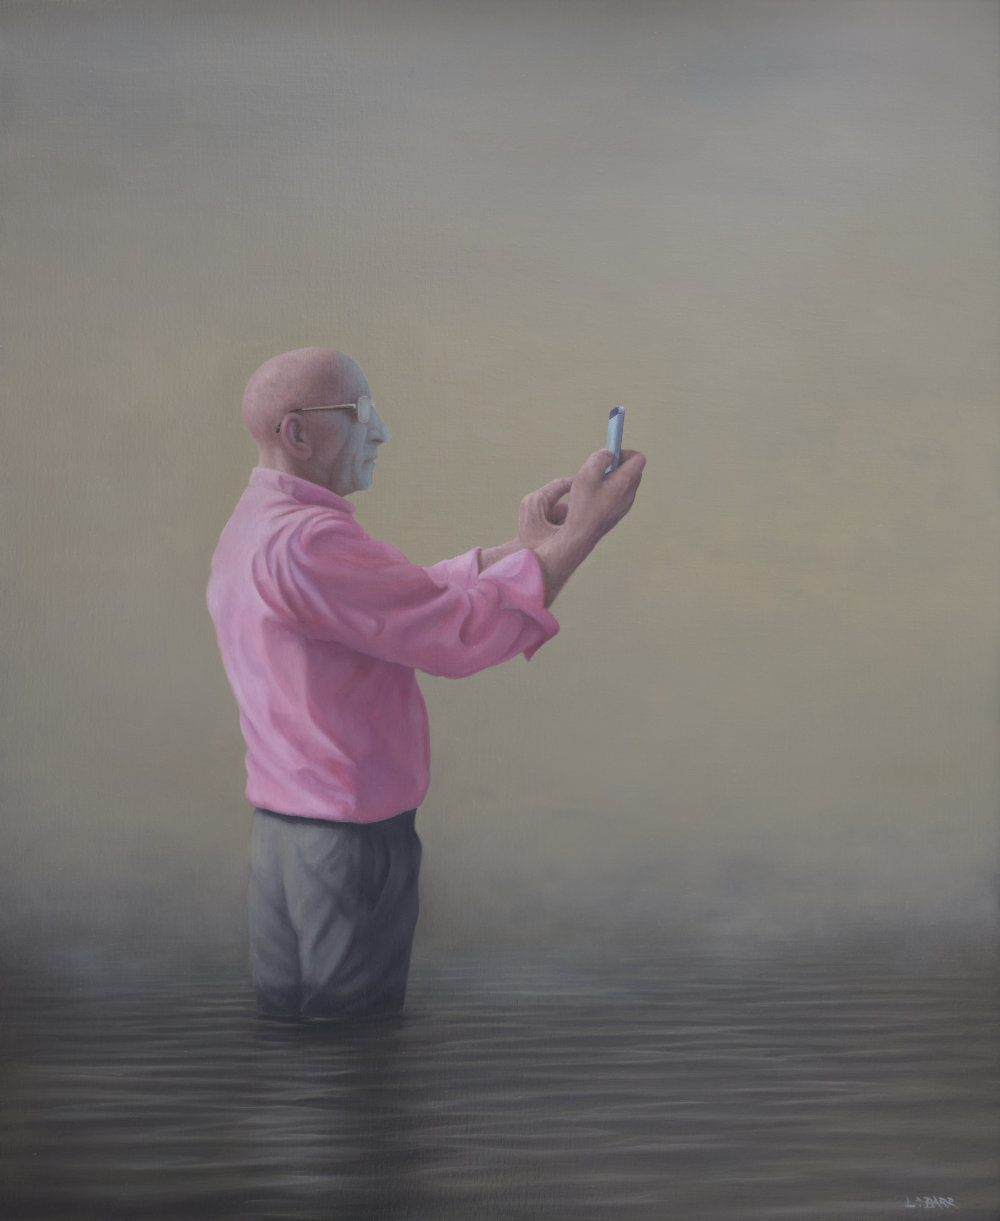 Painting of a man standing in water trying to get a signal.